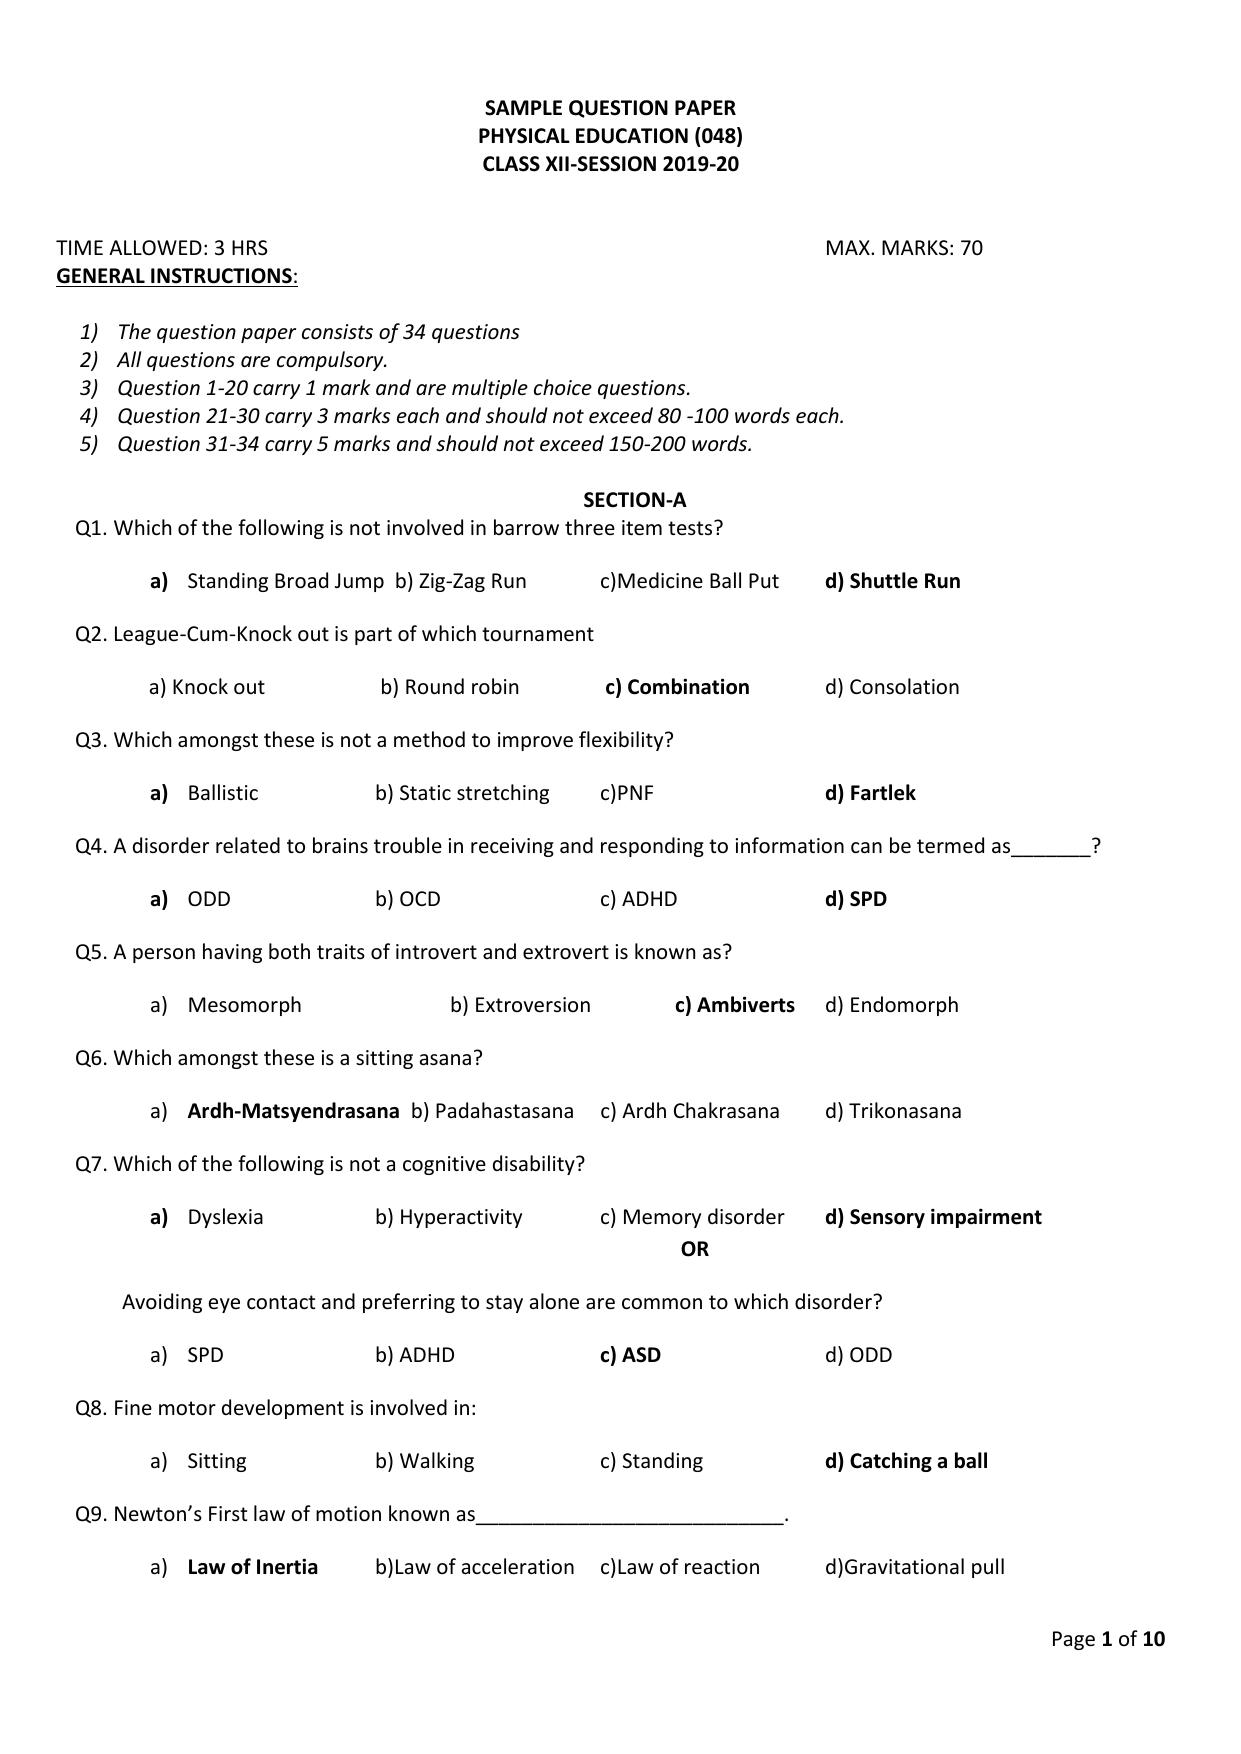 CBSE Class 12 Physical Education -Sample Paper 2019-20 - Page 1